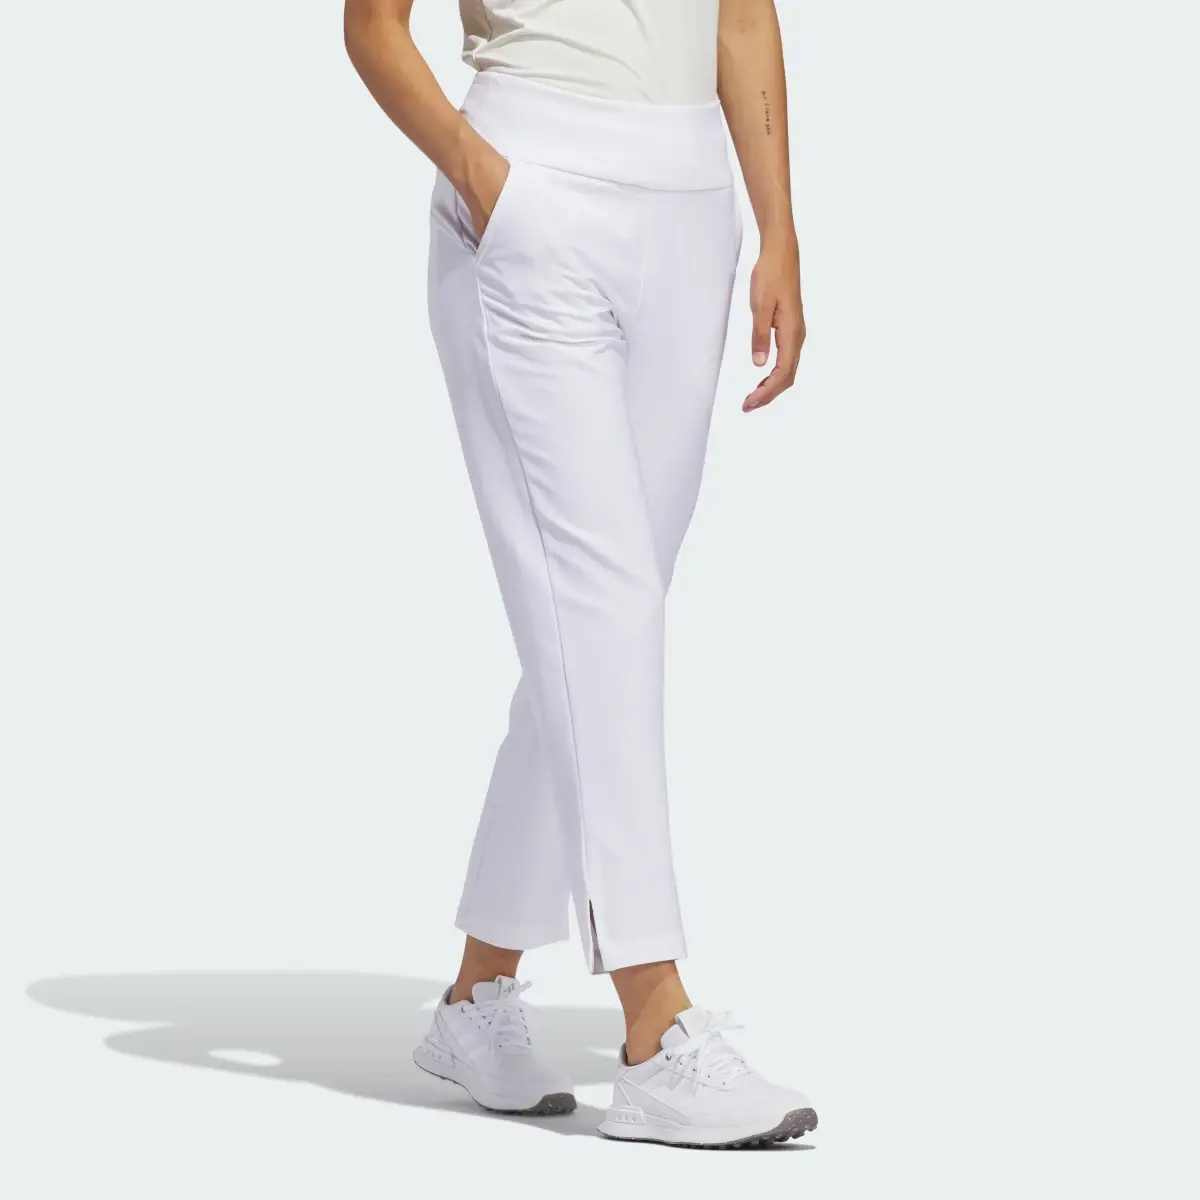 Adidas Ultimate365 Solid Ankle Pants. 3